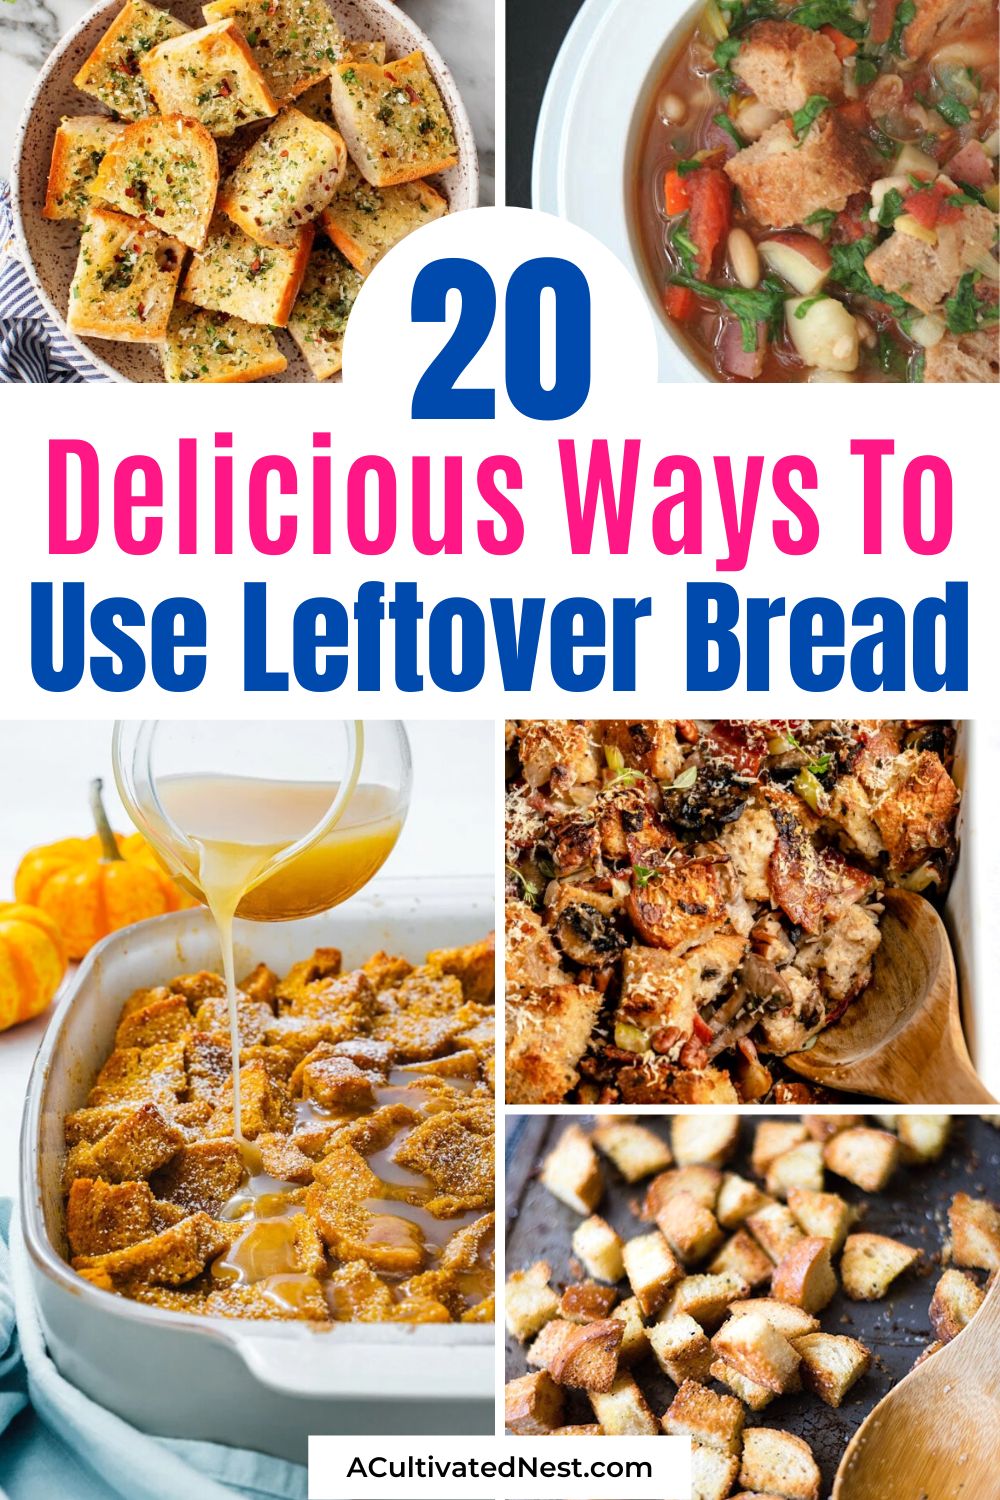 20 Brilliant Ways To Use Leftover Bread- If you have some days old bread, here are some great recipes to use it up! Leftover bread makes a great ingredient in stuffing, casseroles, puddings, and more! | what to do with old bread, #bread #recipeIdeas #frugalLiving #frugalRecipes #ACultivatedNest